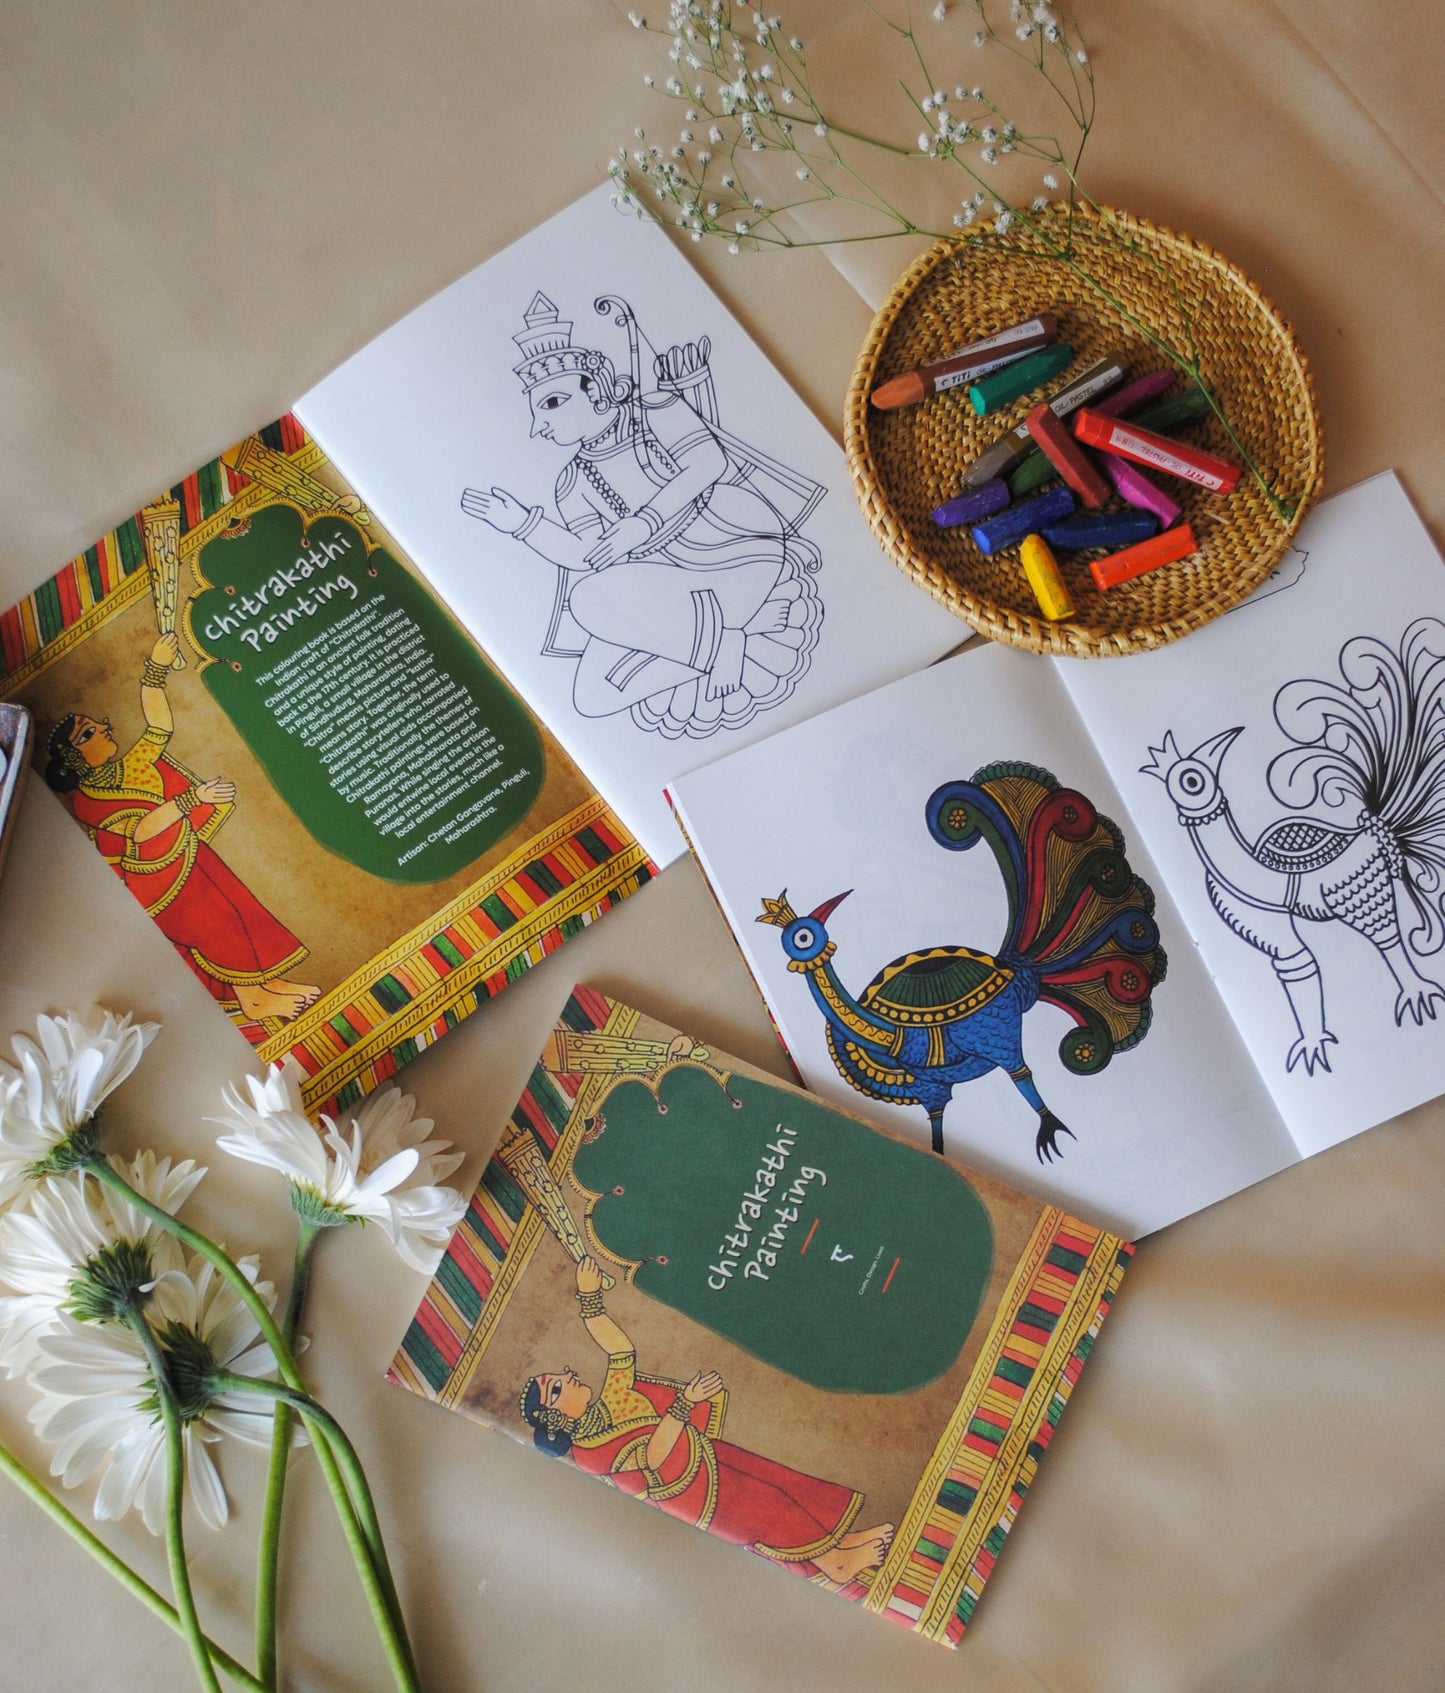 Artwork by native craftsmen of Chitrakathi, Gond, that are used as motifs to create stationery and colouring books